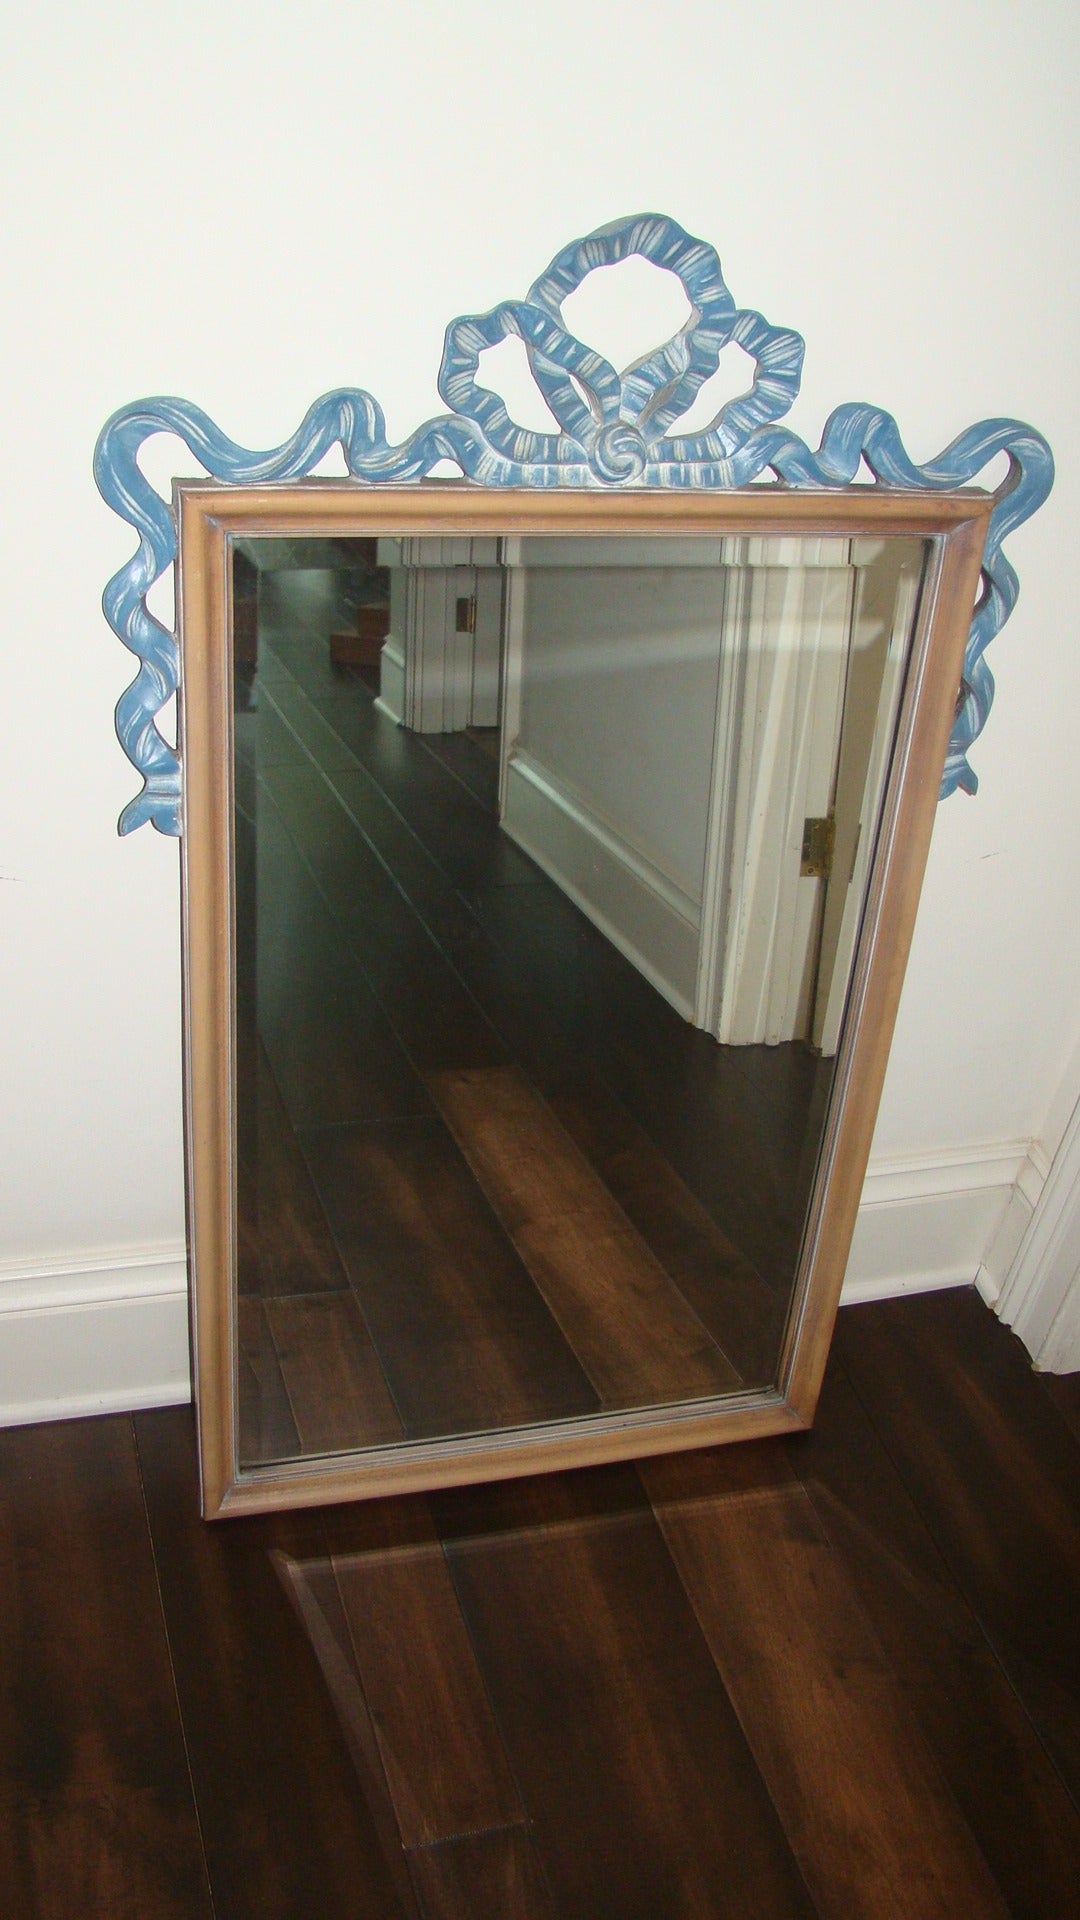 Glamorous Mid-Century sculptural wood ribbon wall hanging mirror in the manner of Dorothy Draper or Tommi Parzinger. The mirror is comprised of a wood frame with blue ribbon design along the top. The mirror has a bevel on the inside boarder. Truly a